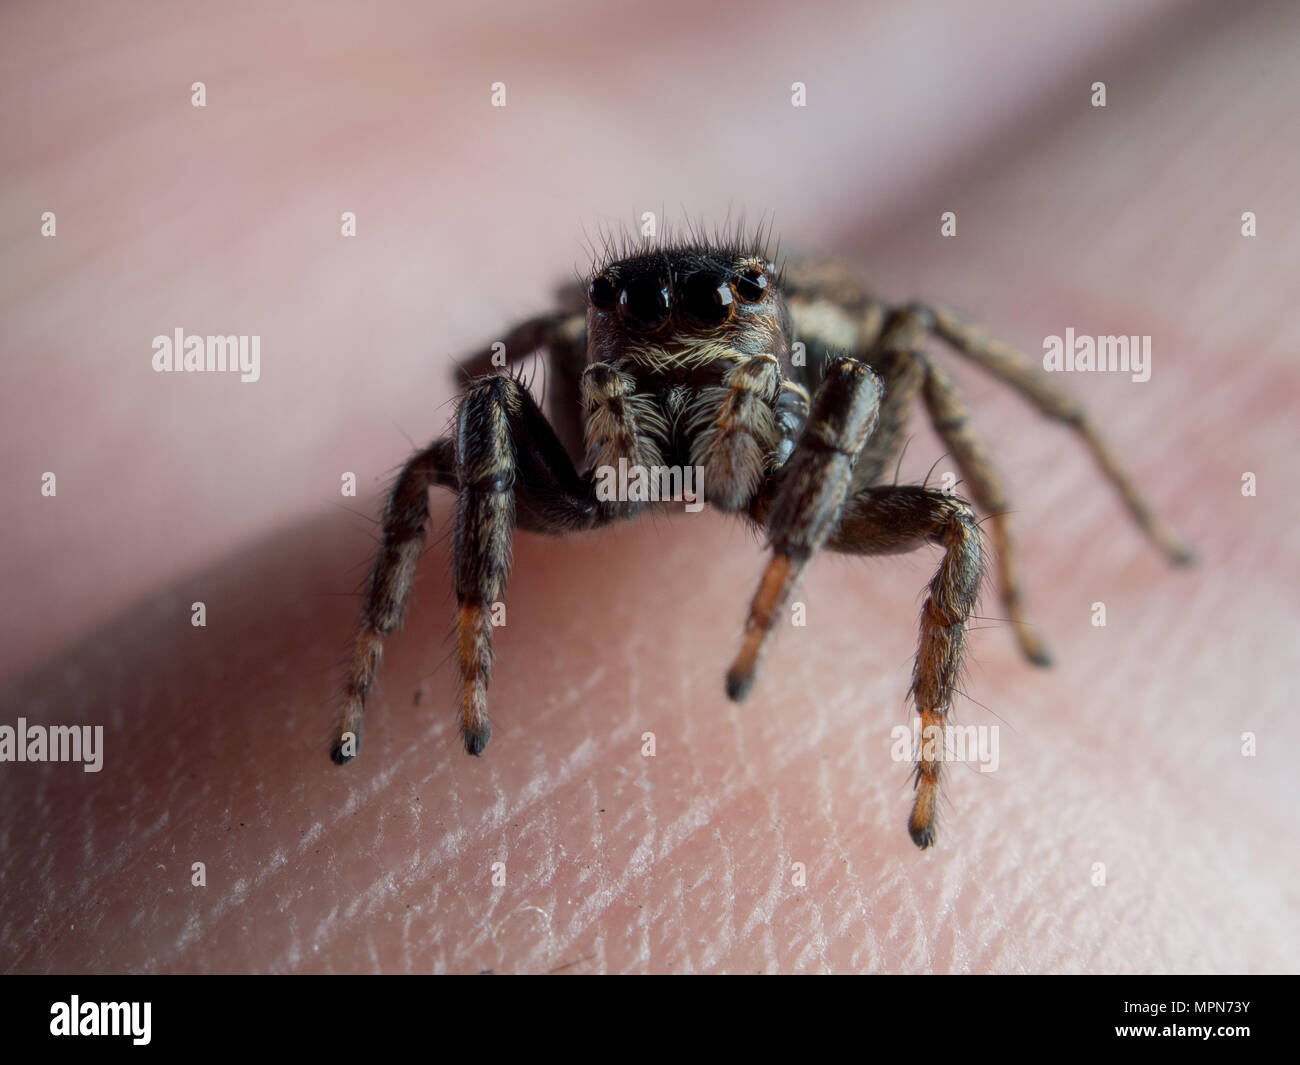 Jumping spider on a human finger (Salticidae) Stock Photo